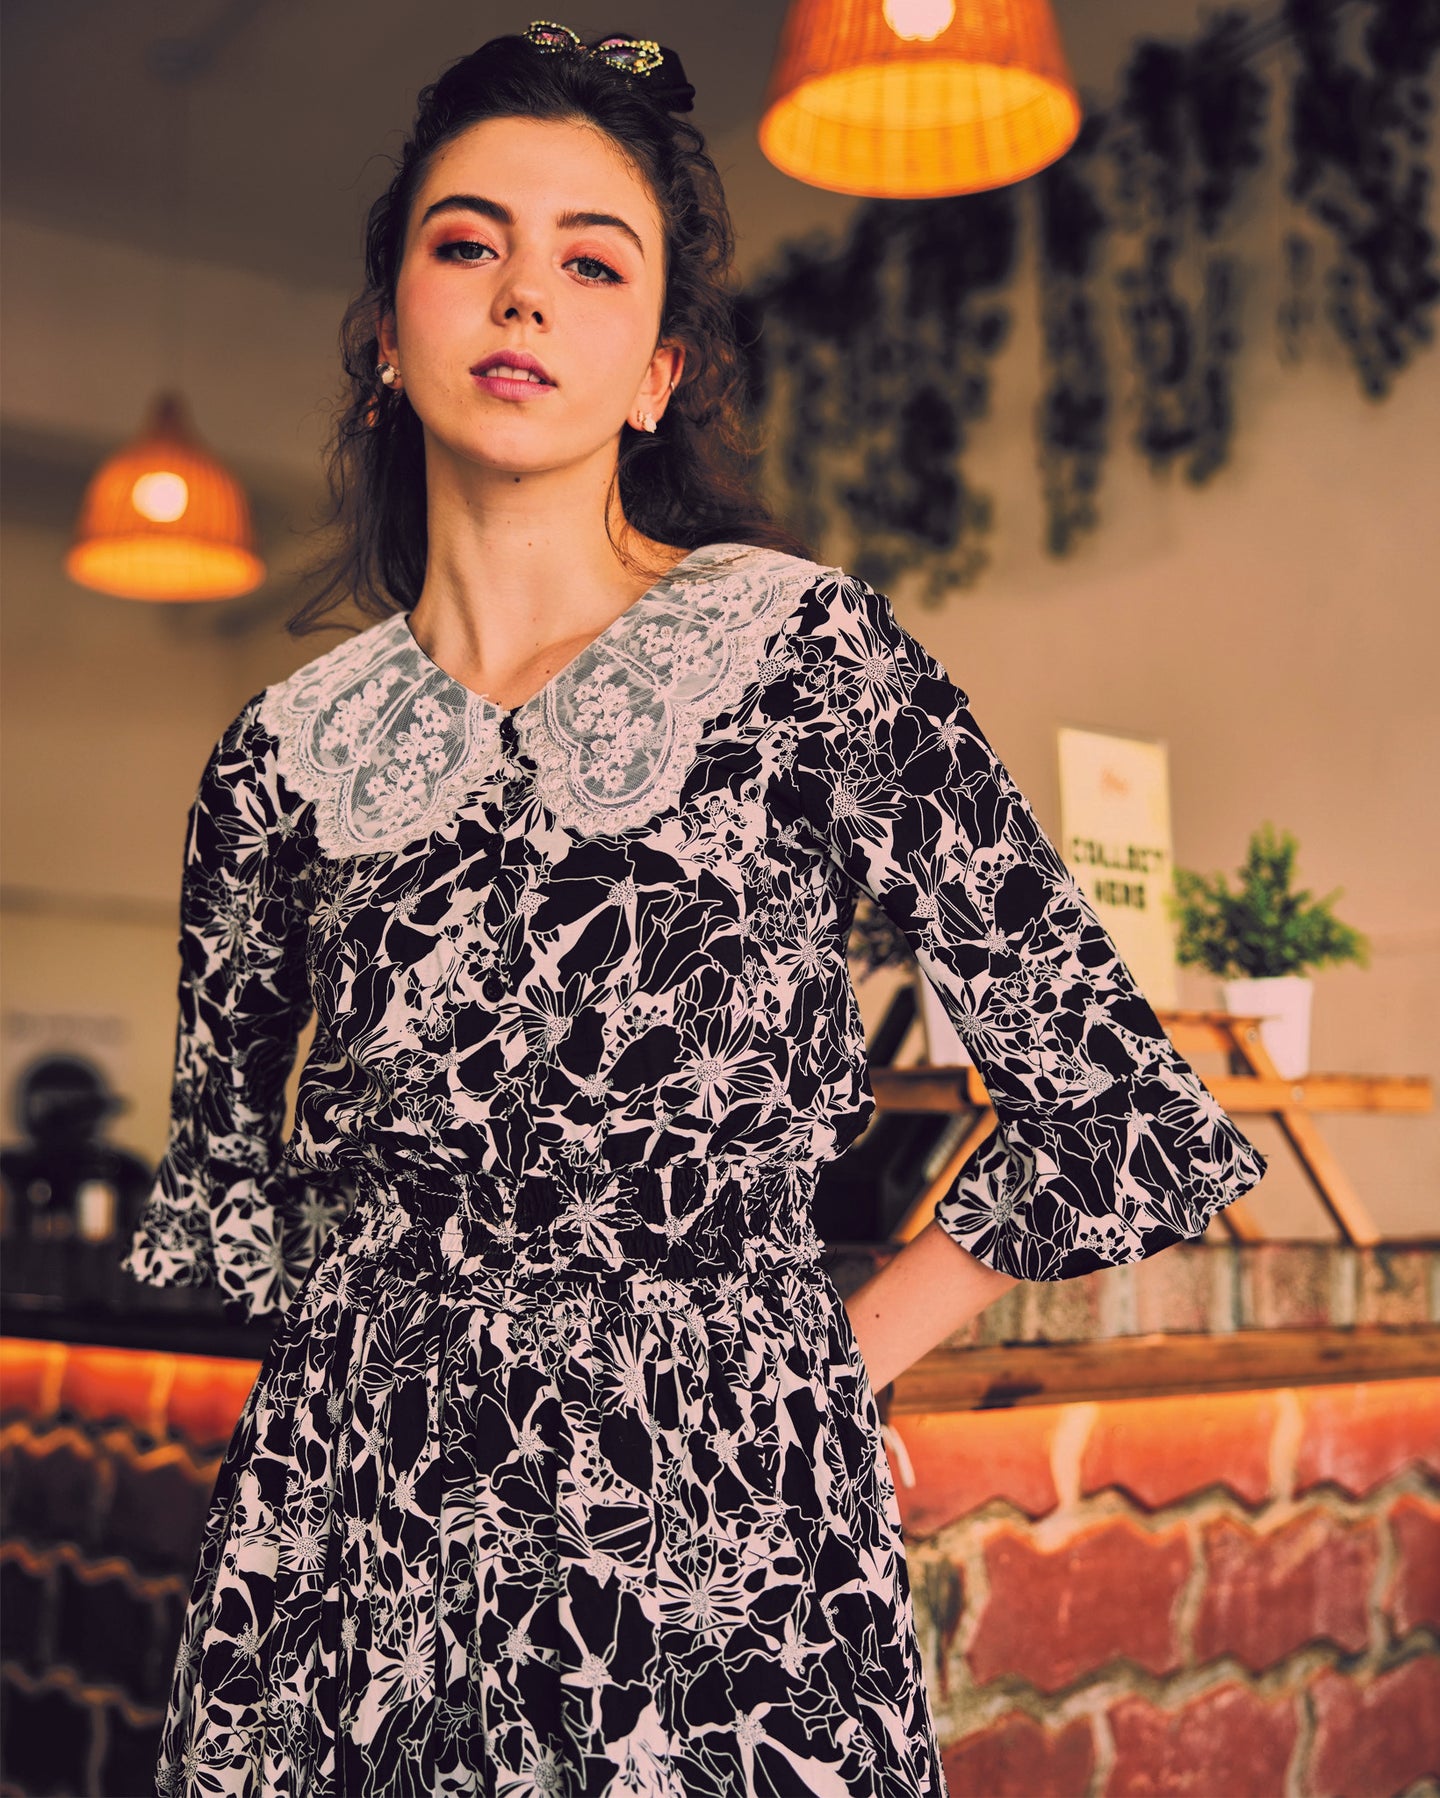 Printed Lace Collar Blouse